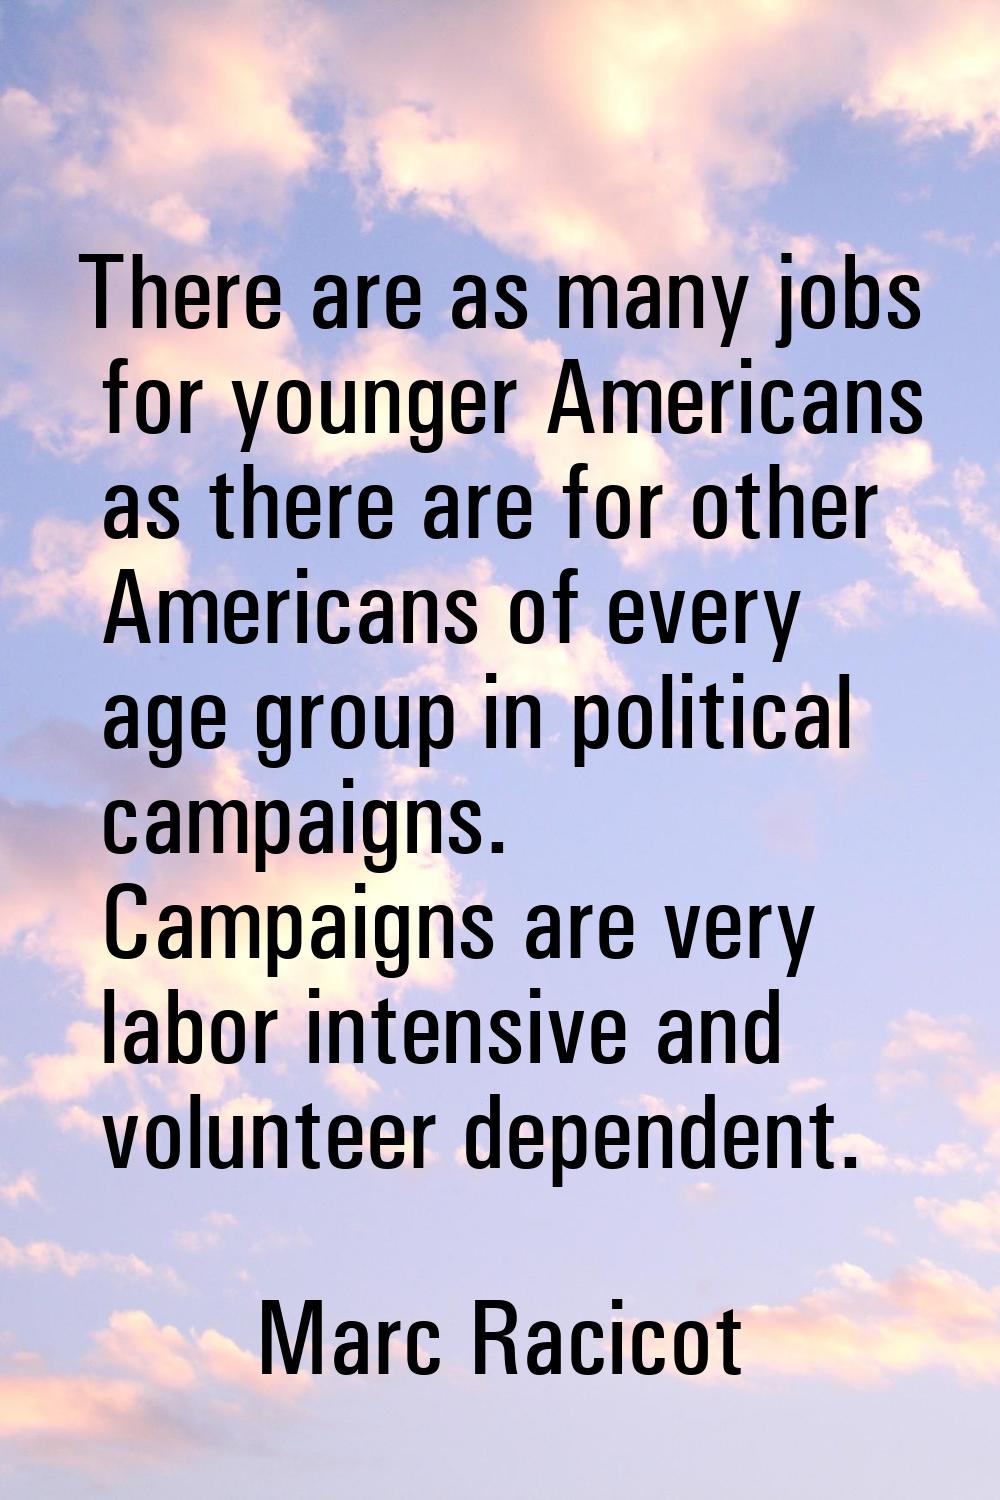 There are as many jobs for younger Americans as there are for other Americans of every age group in